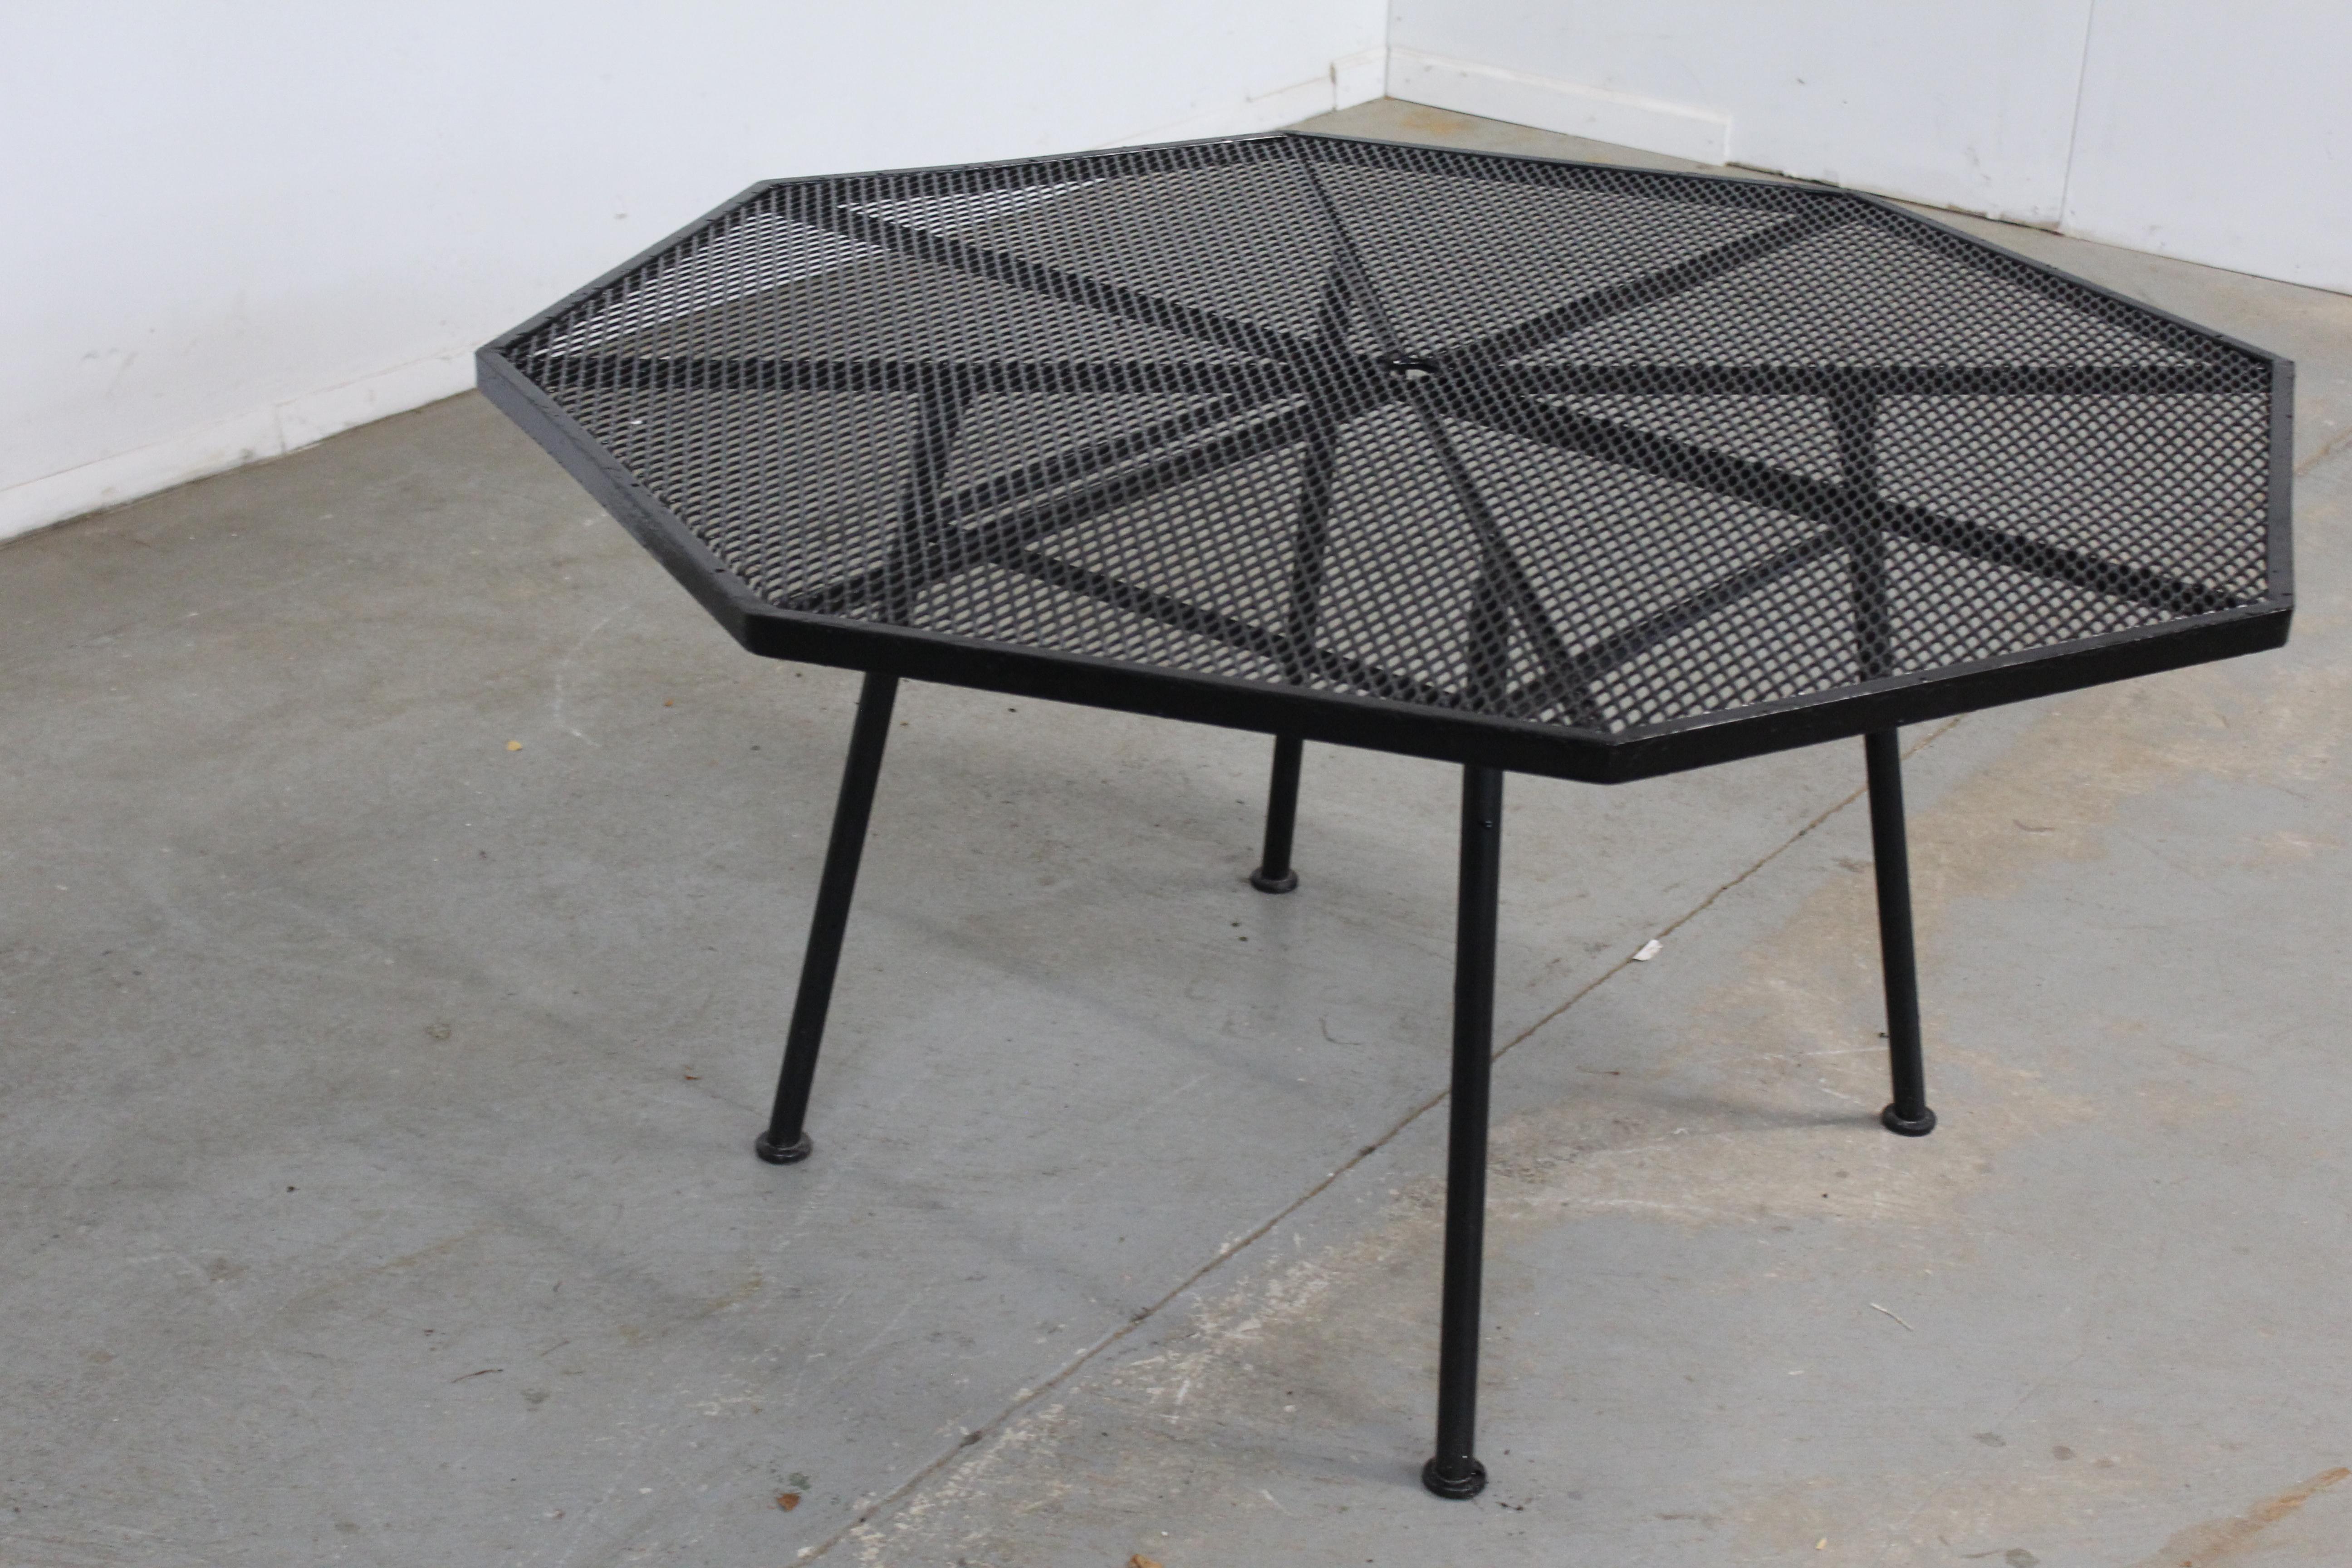 Mid-Century outdoor iron woodard sculptura octagonal dining table
Offered is a mid-century outdoor iron woodard sculptura octagonal dining table. Features Black paint and woven wrought iron. The table is structurally sound in good condition and can